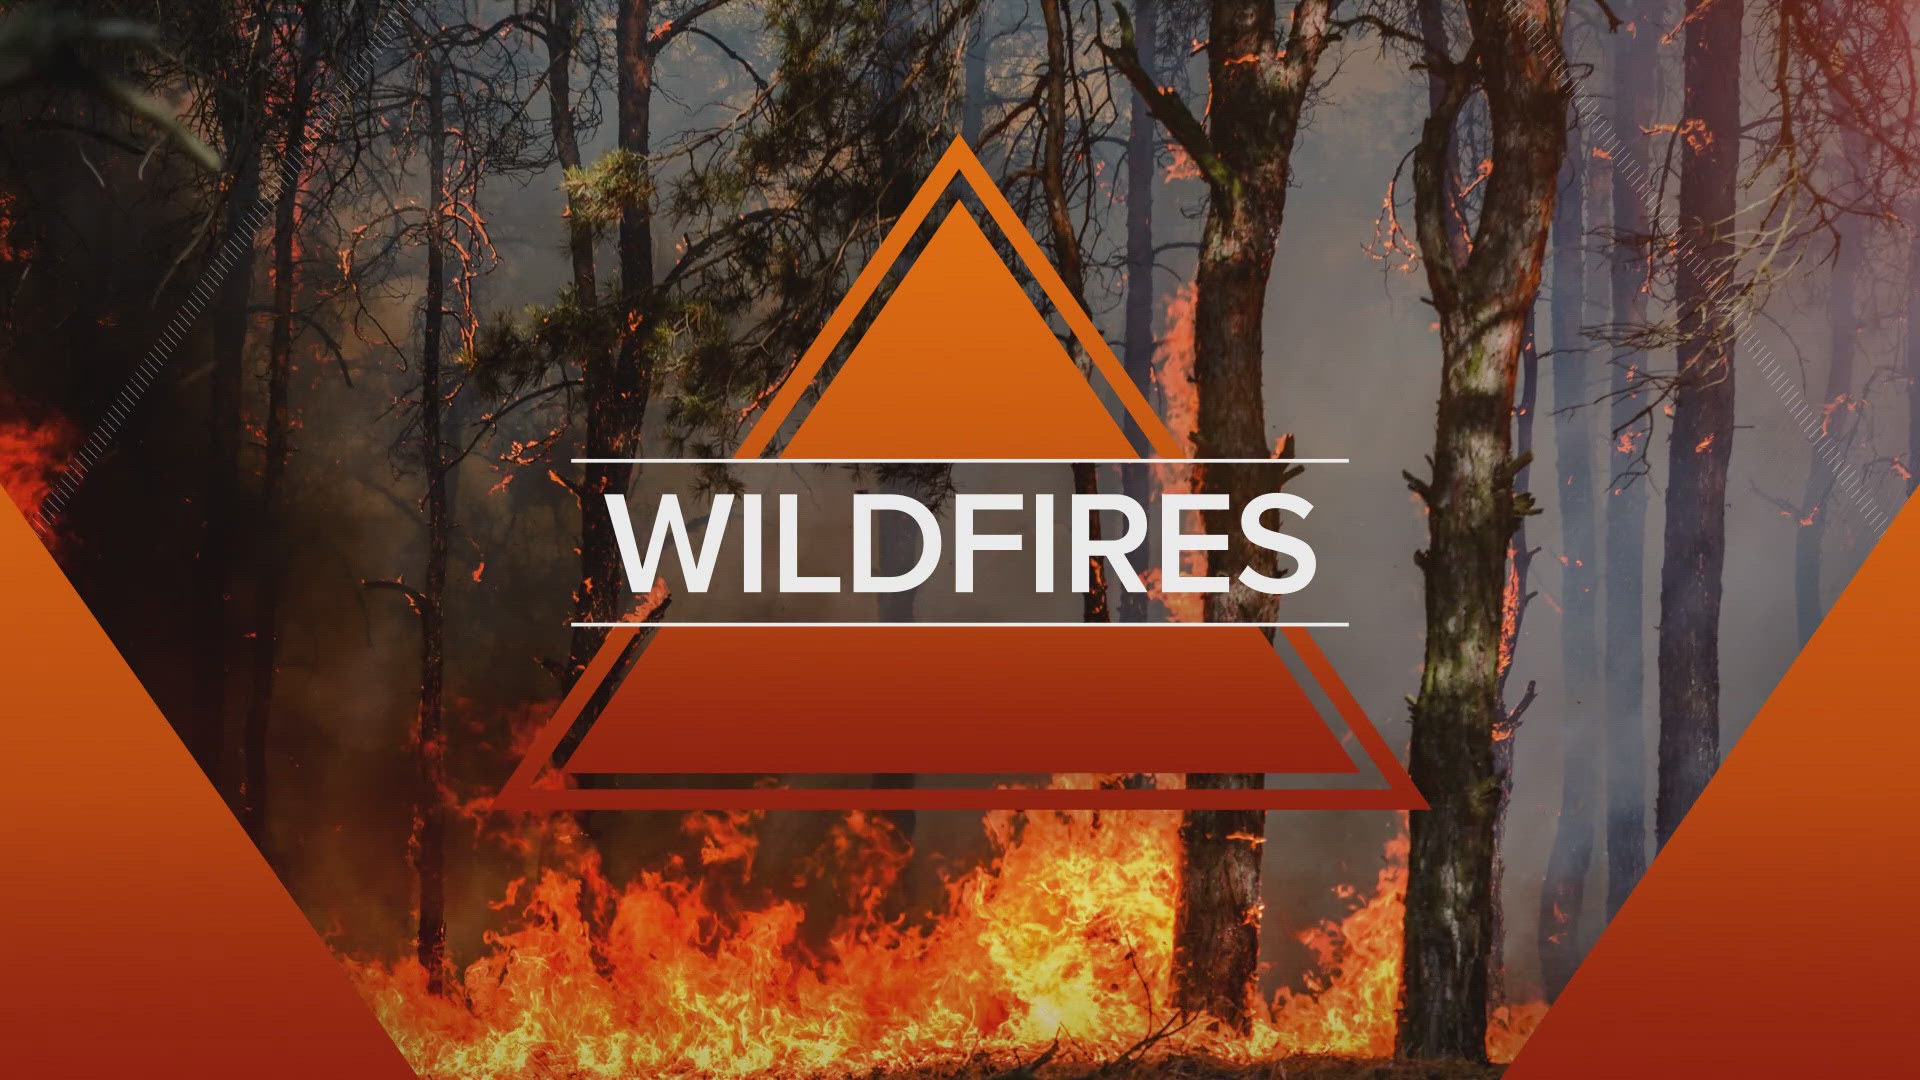 Two wildfires affected the Valley this weekend cutting off highway access to the High Country from Phoenix for most of Saturday.